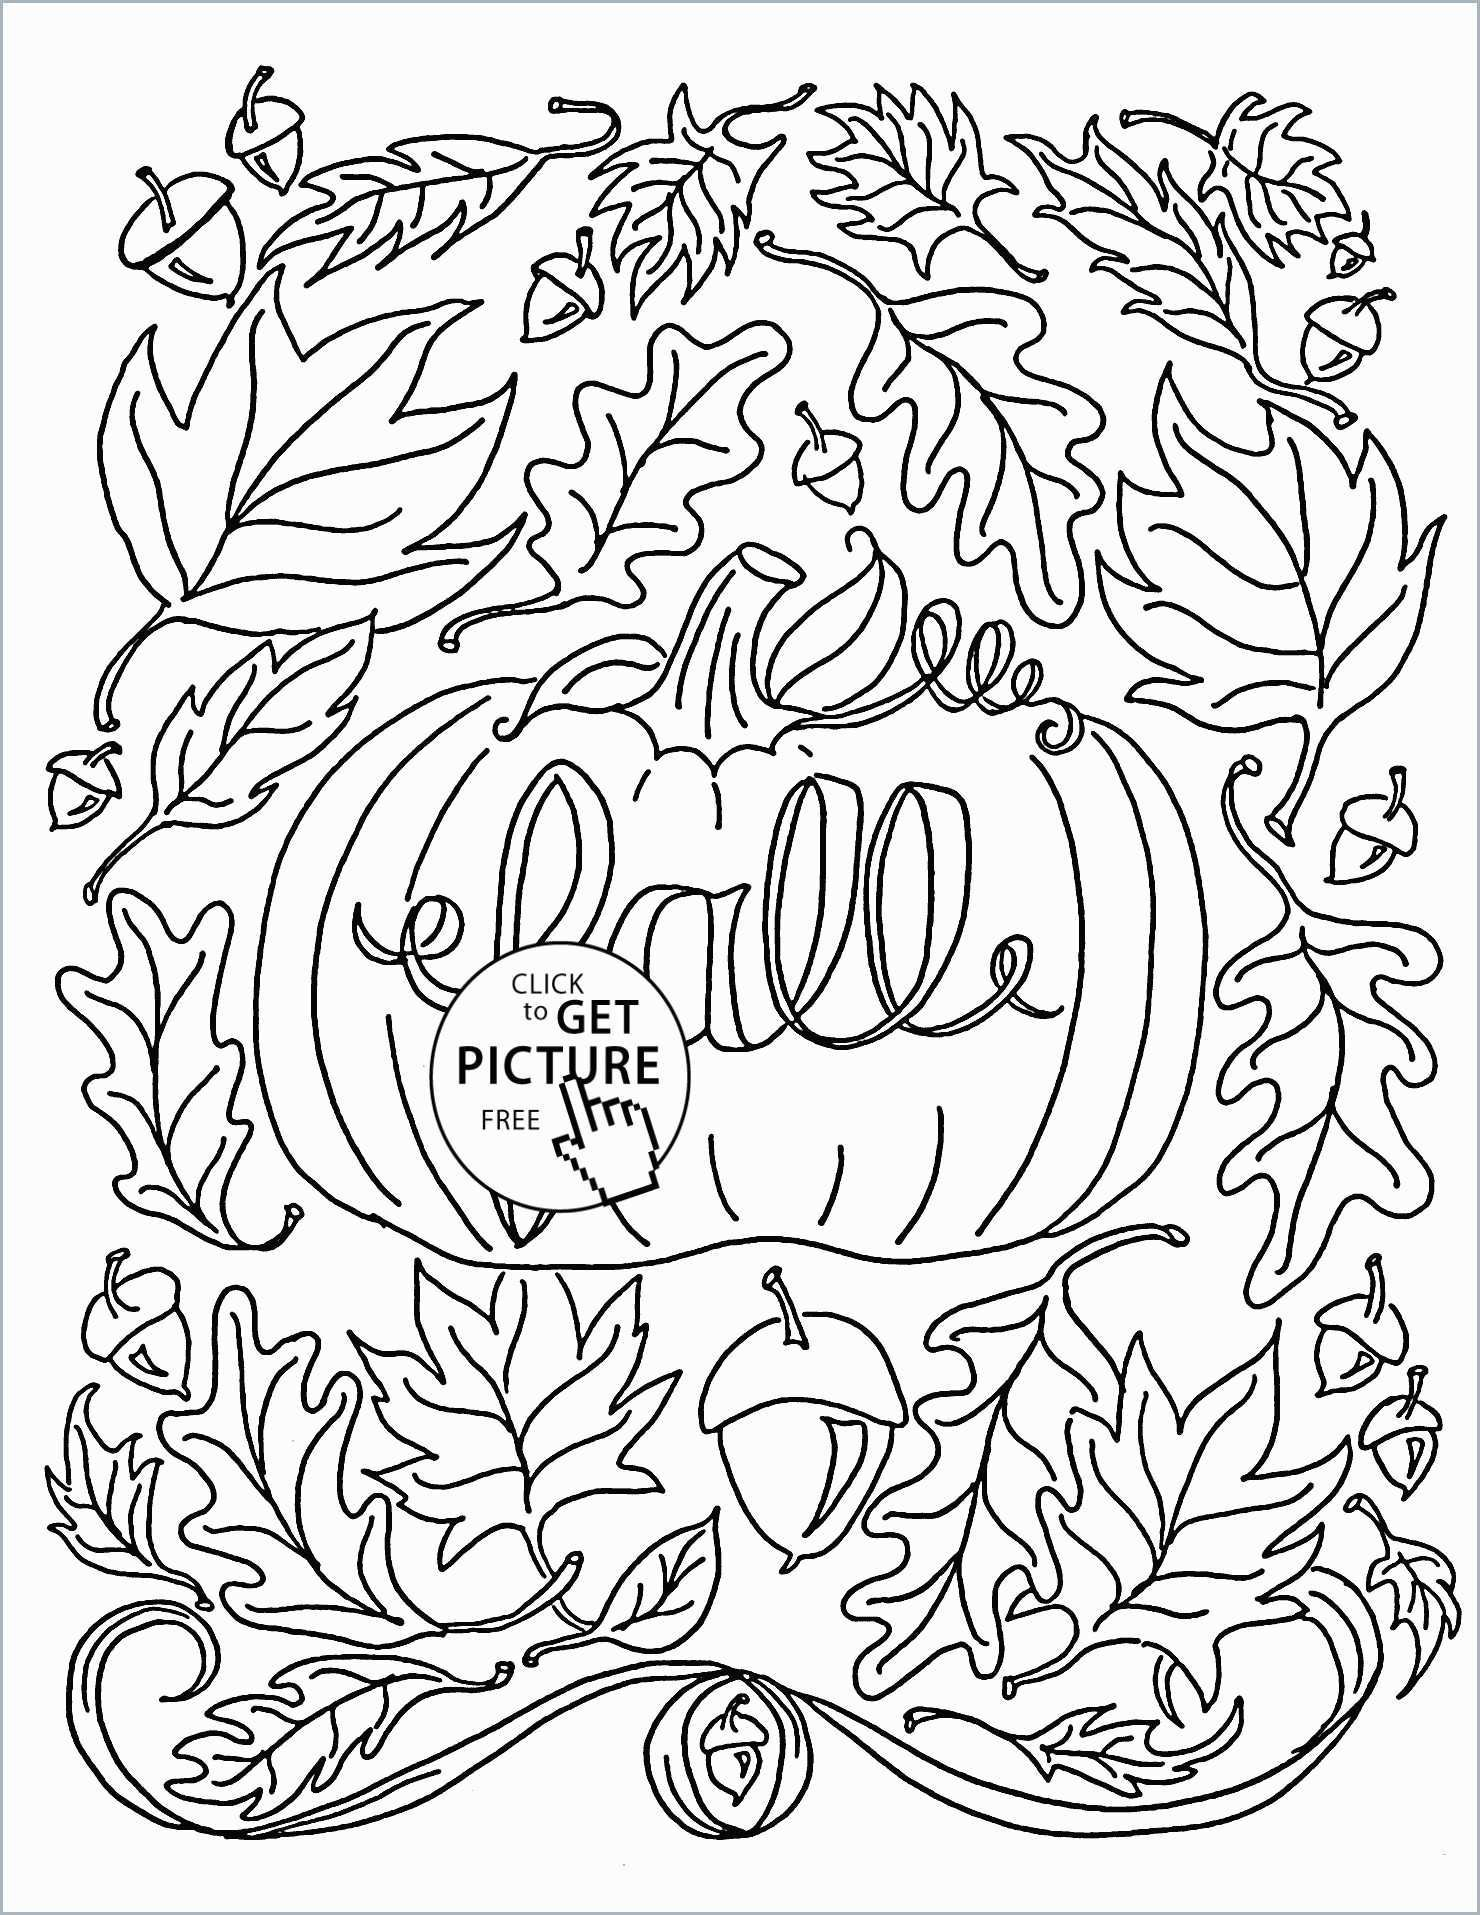 Fall Coloring Page Free Advent Coloring Pages Fresh Free Printable Fall Coloring Pages